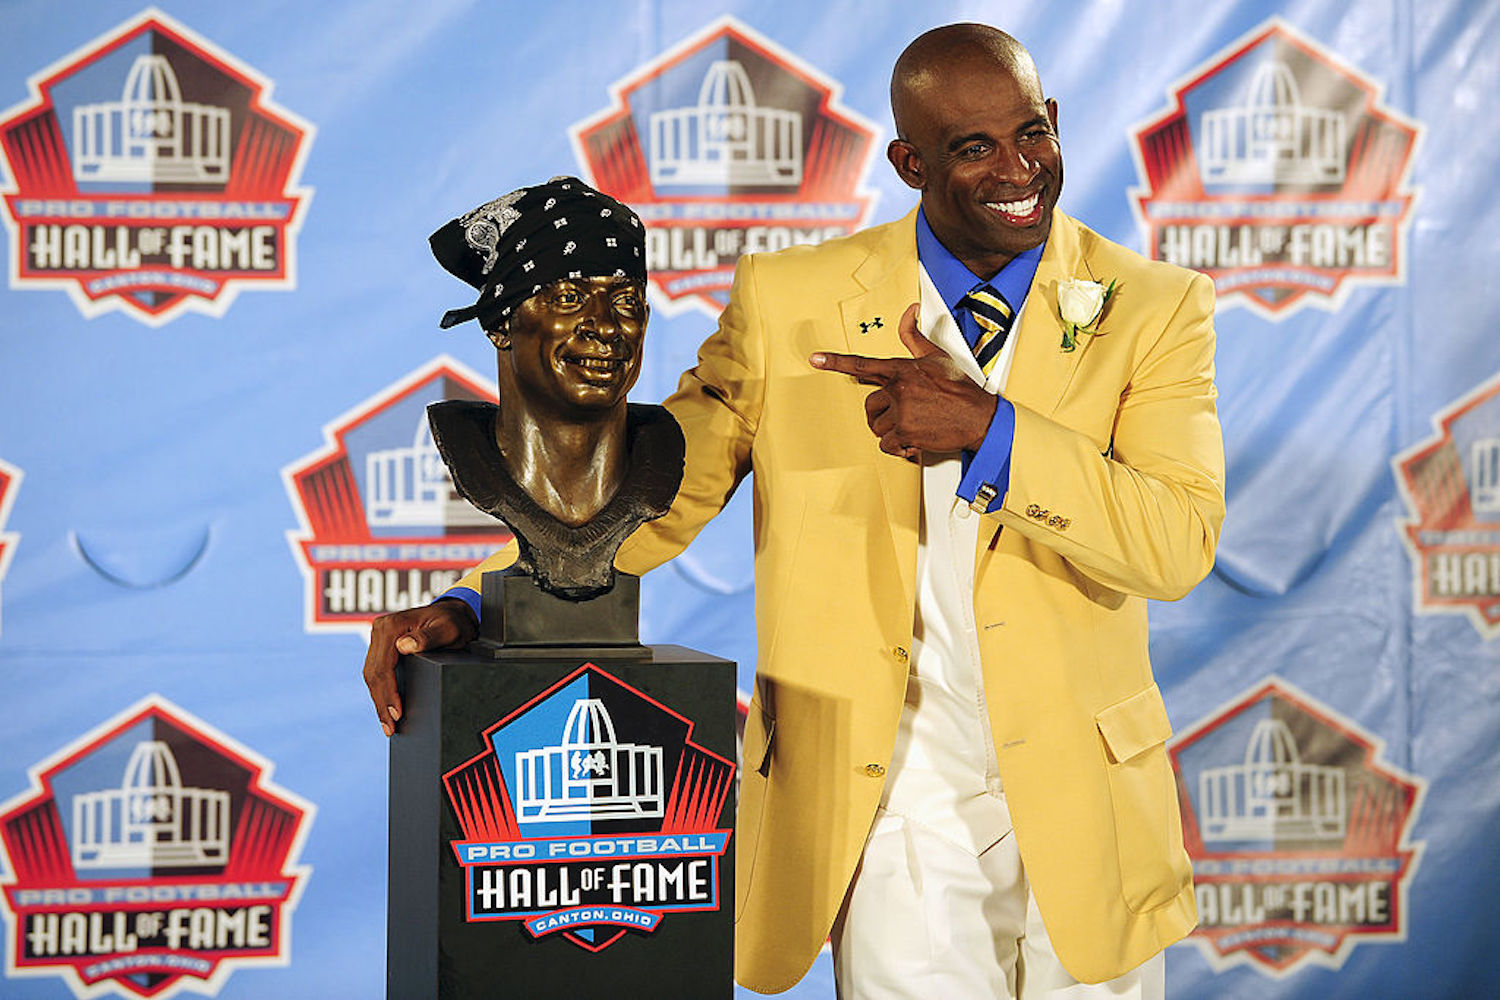 Deion Sanders was inducted into the Pro Football Hall of Fame in 2011, but he didn't receive the news from anyone involved in the NFL.